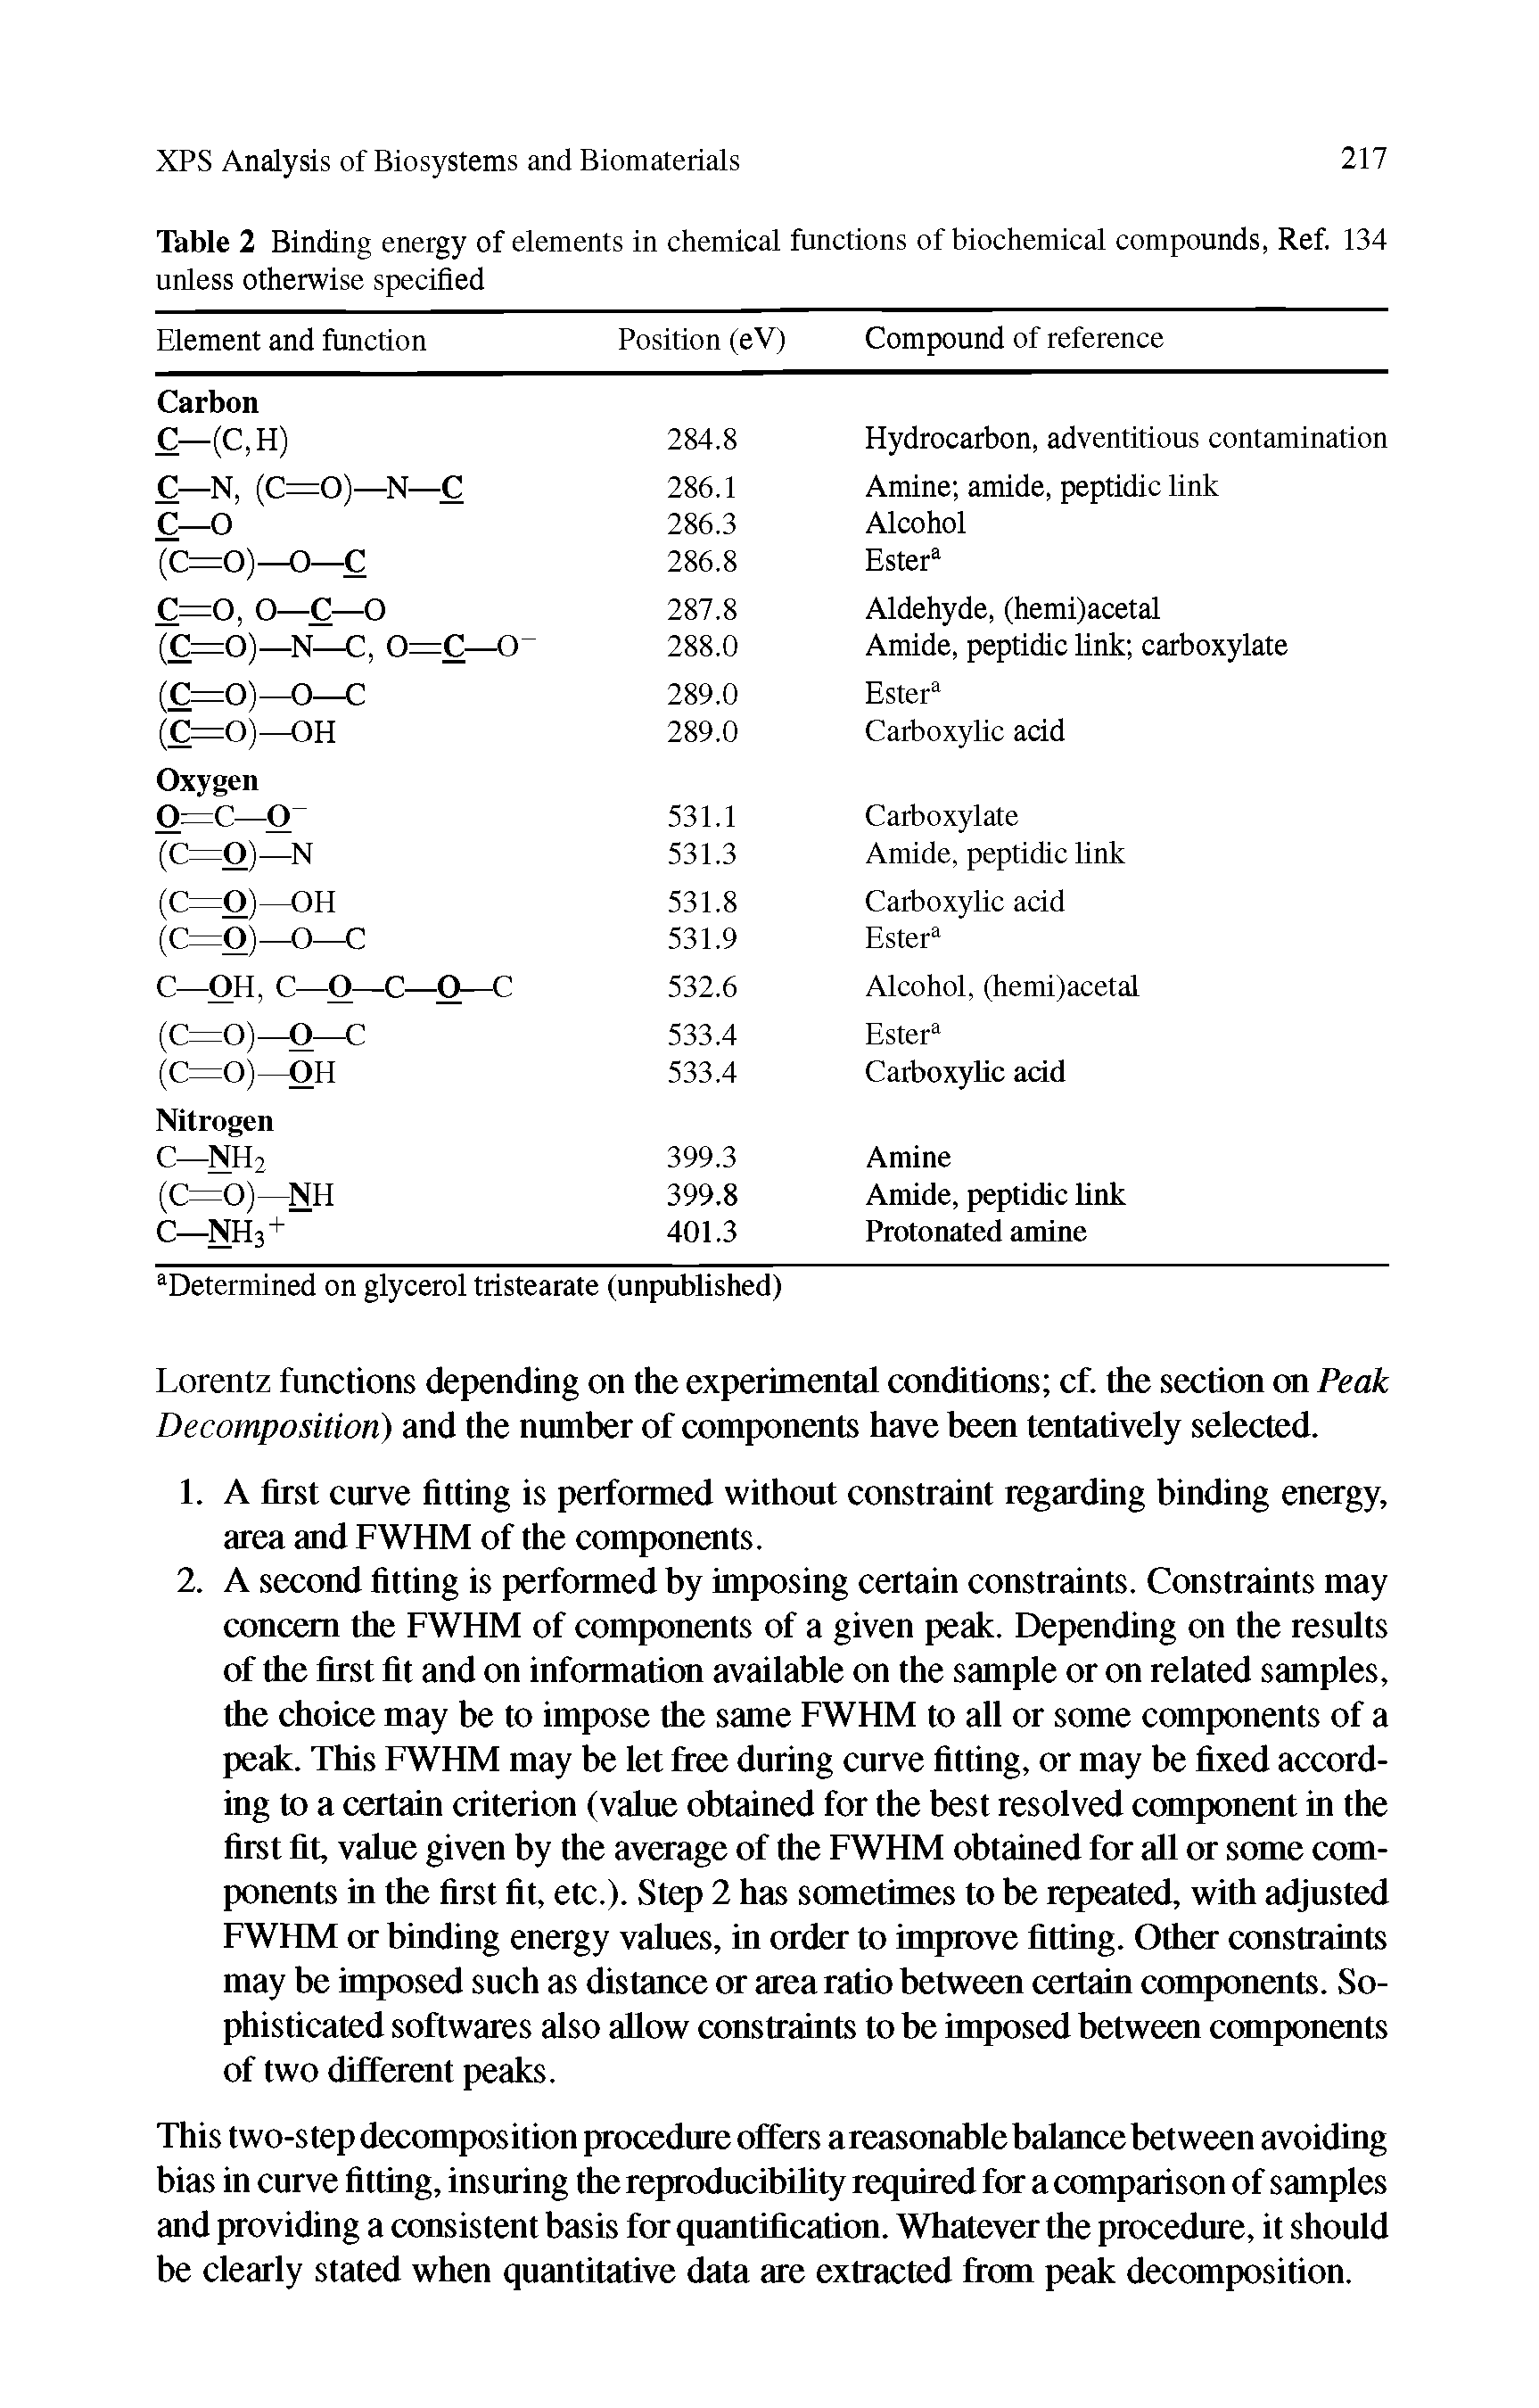 Table 2 Binding energy of elements in chemical functions of biochemical compounds, Ref. 134 unless otherwise specified...